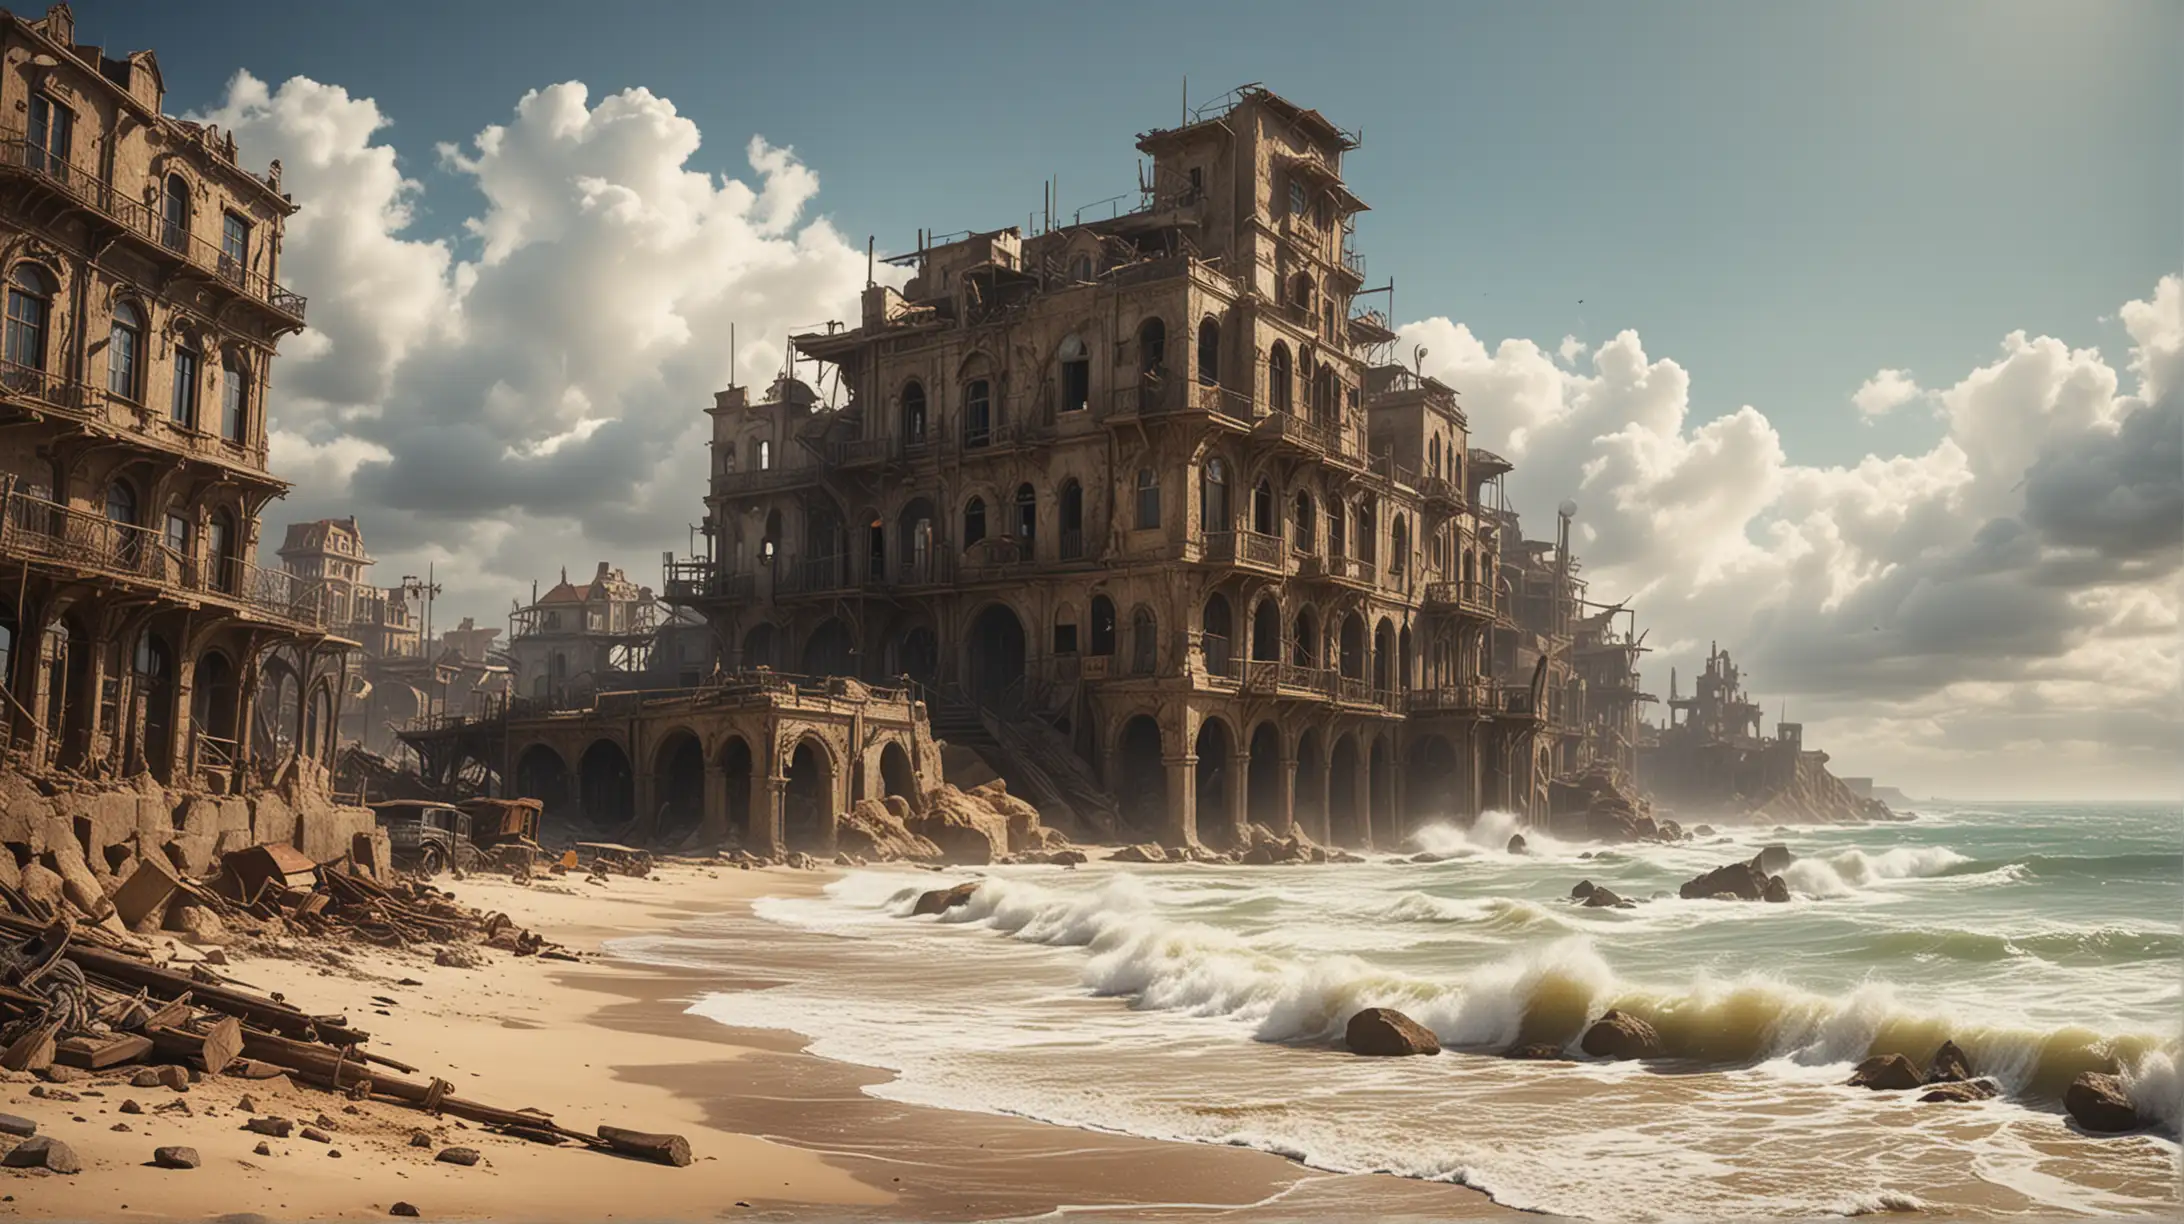 the ruins of a very old steampunk city by the sea, high waves, strong wind, some sand, sunny